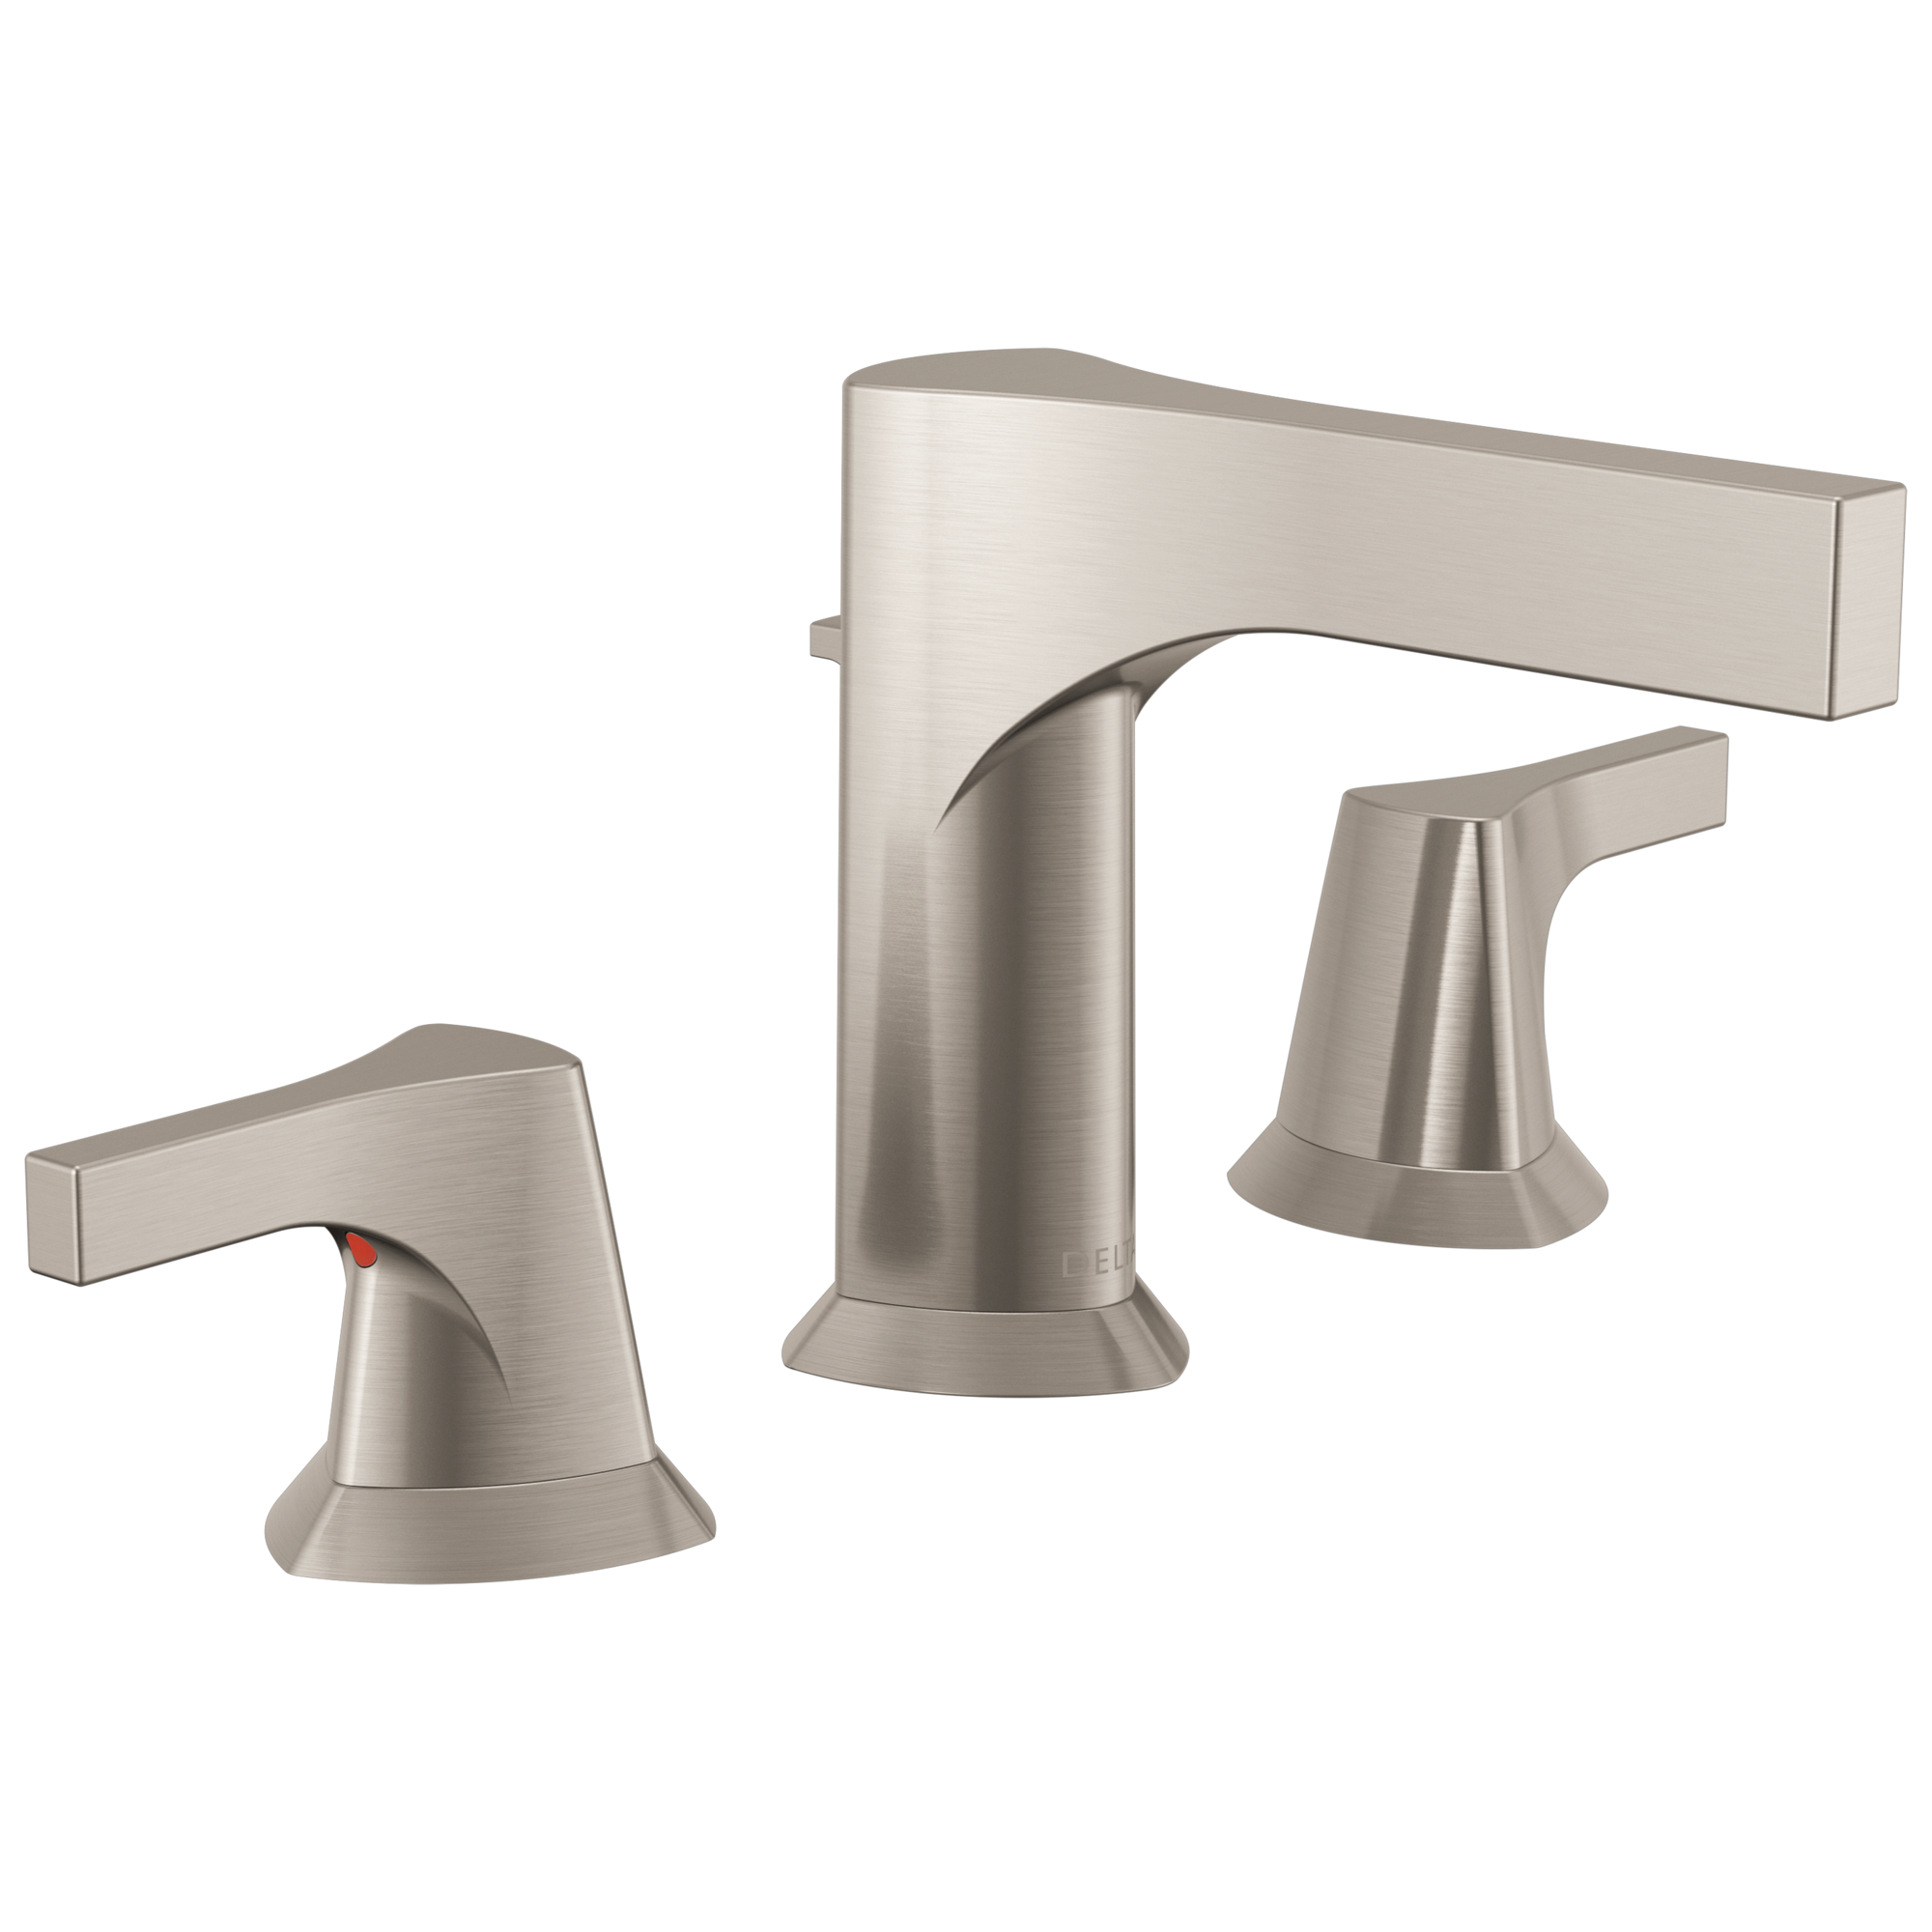 Delta Zura Two Handle Widespread Bathroom Faucet in Stainless